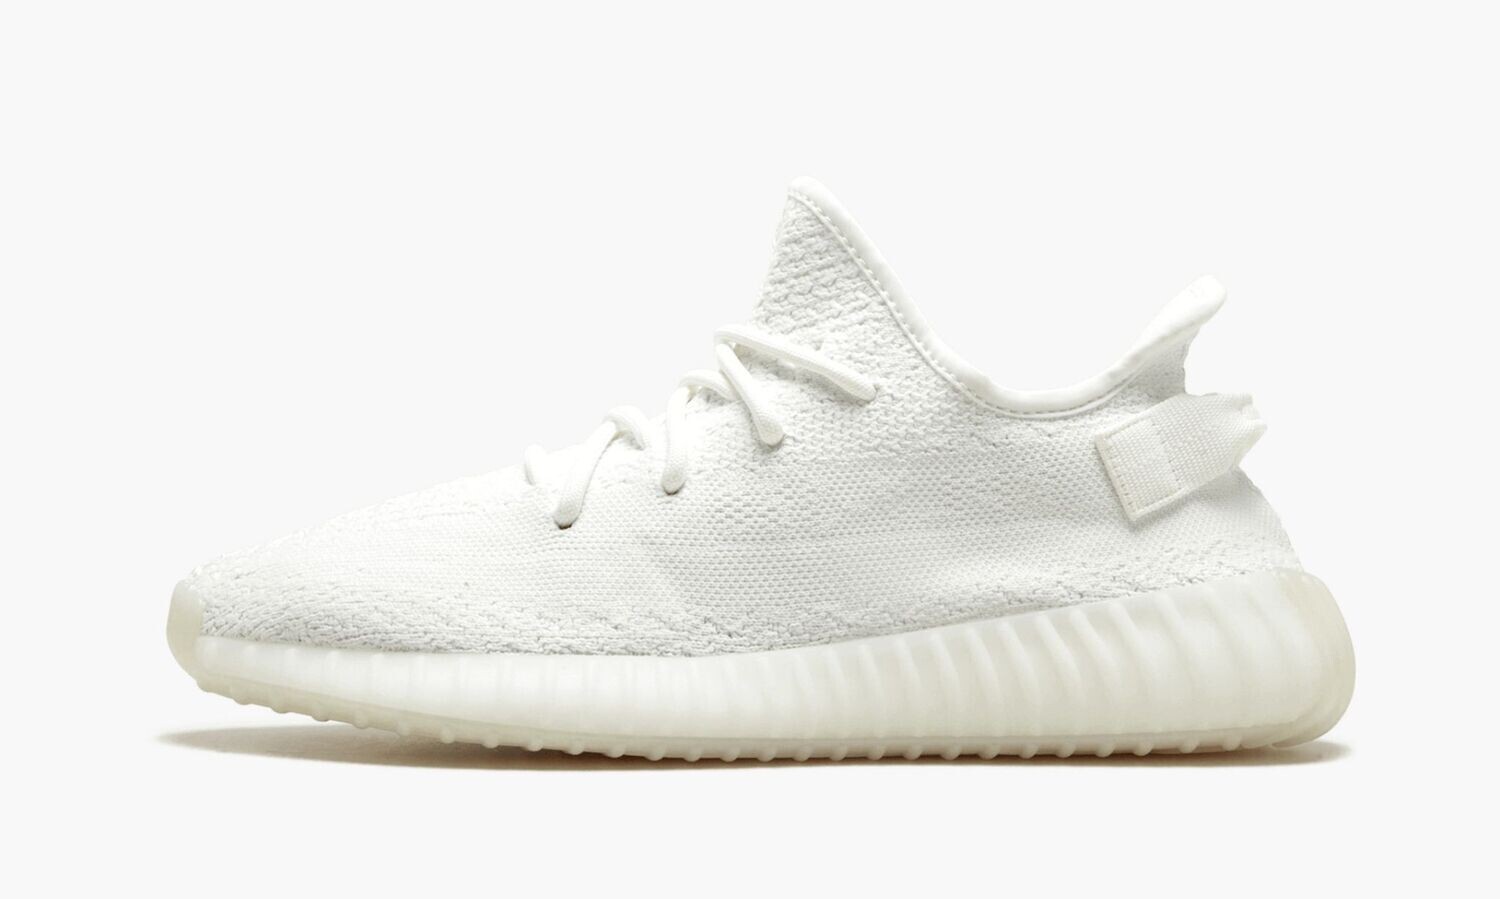 ADIDAS YEEZY
YEEZY BOOST 350 V2
&quot;Triple White&quot;